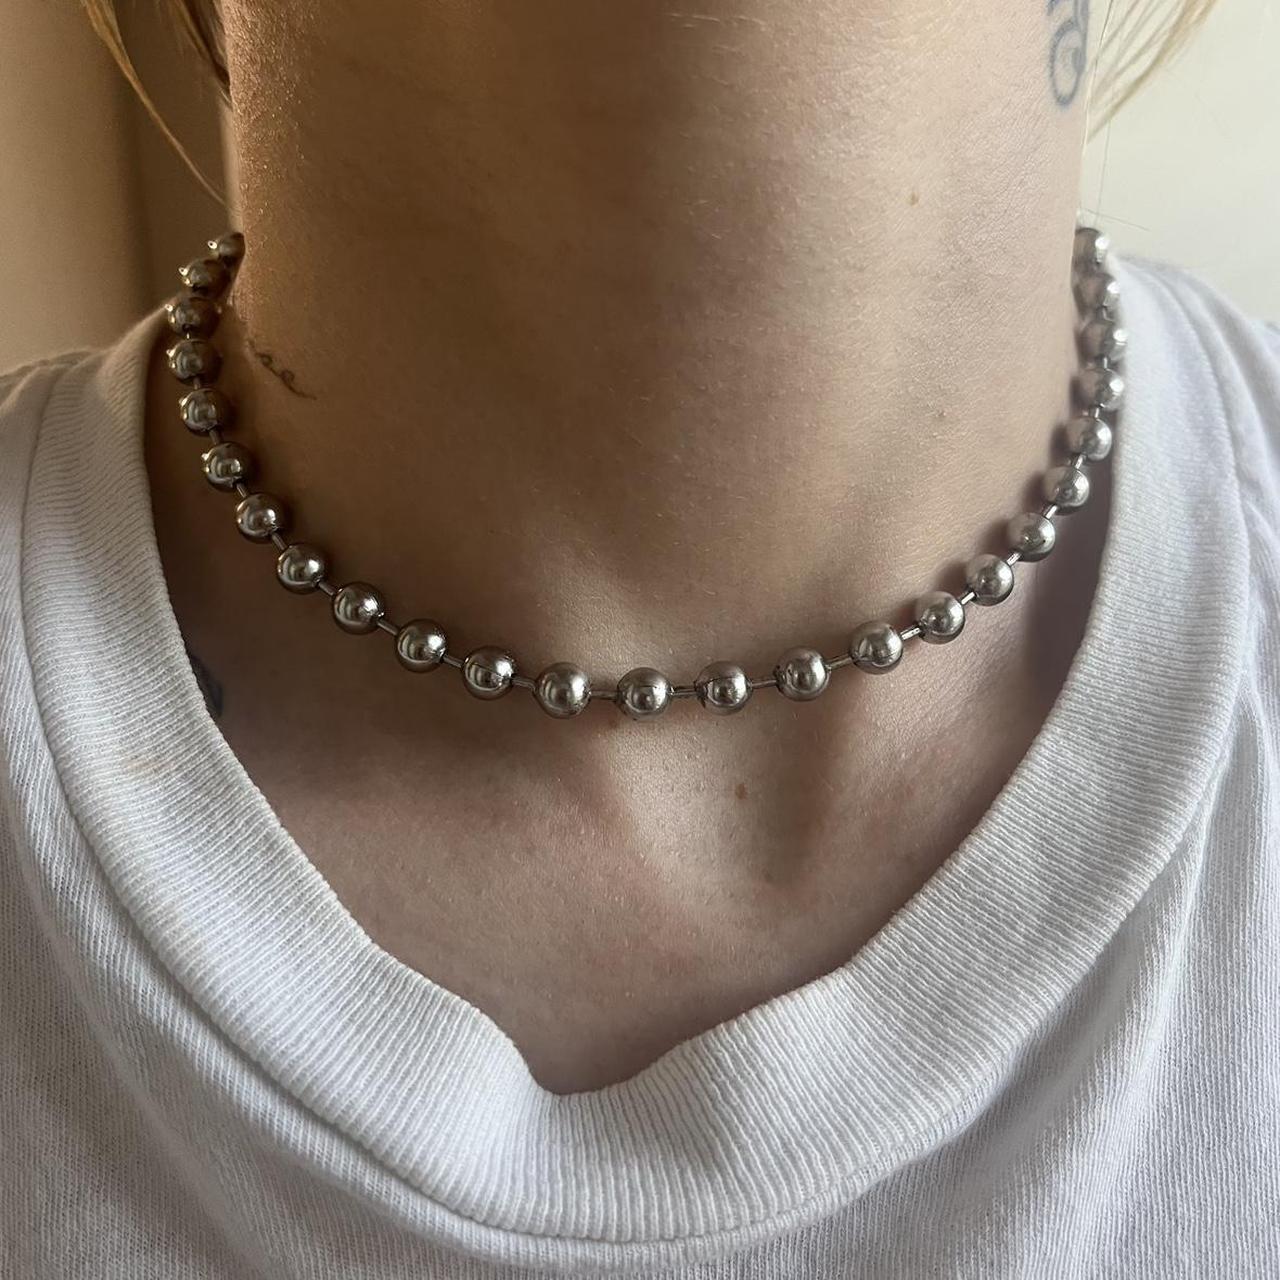 RE:ON STUDIO】BALL CHAIN NECKLACE | OUR BRAND,RE:ON STUDIO | PRESSING WEB  SHOP